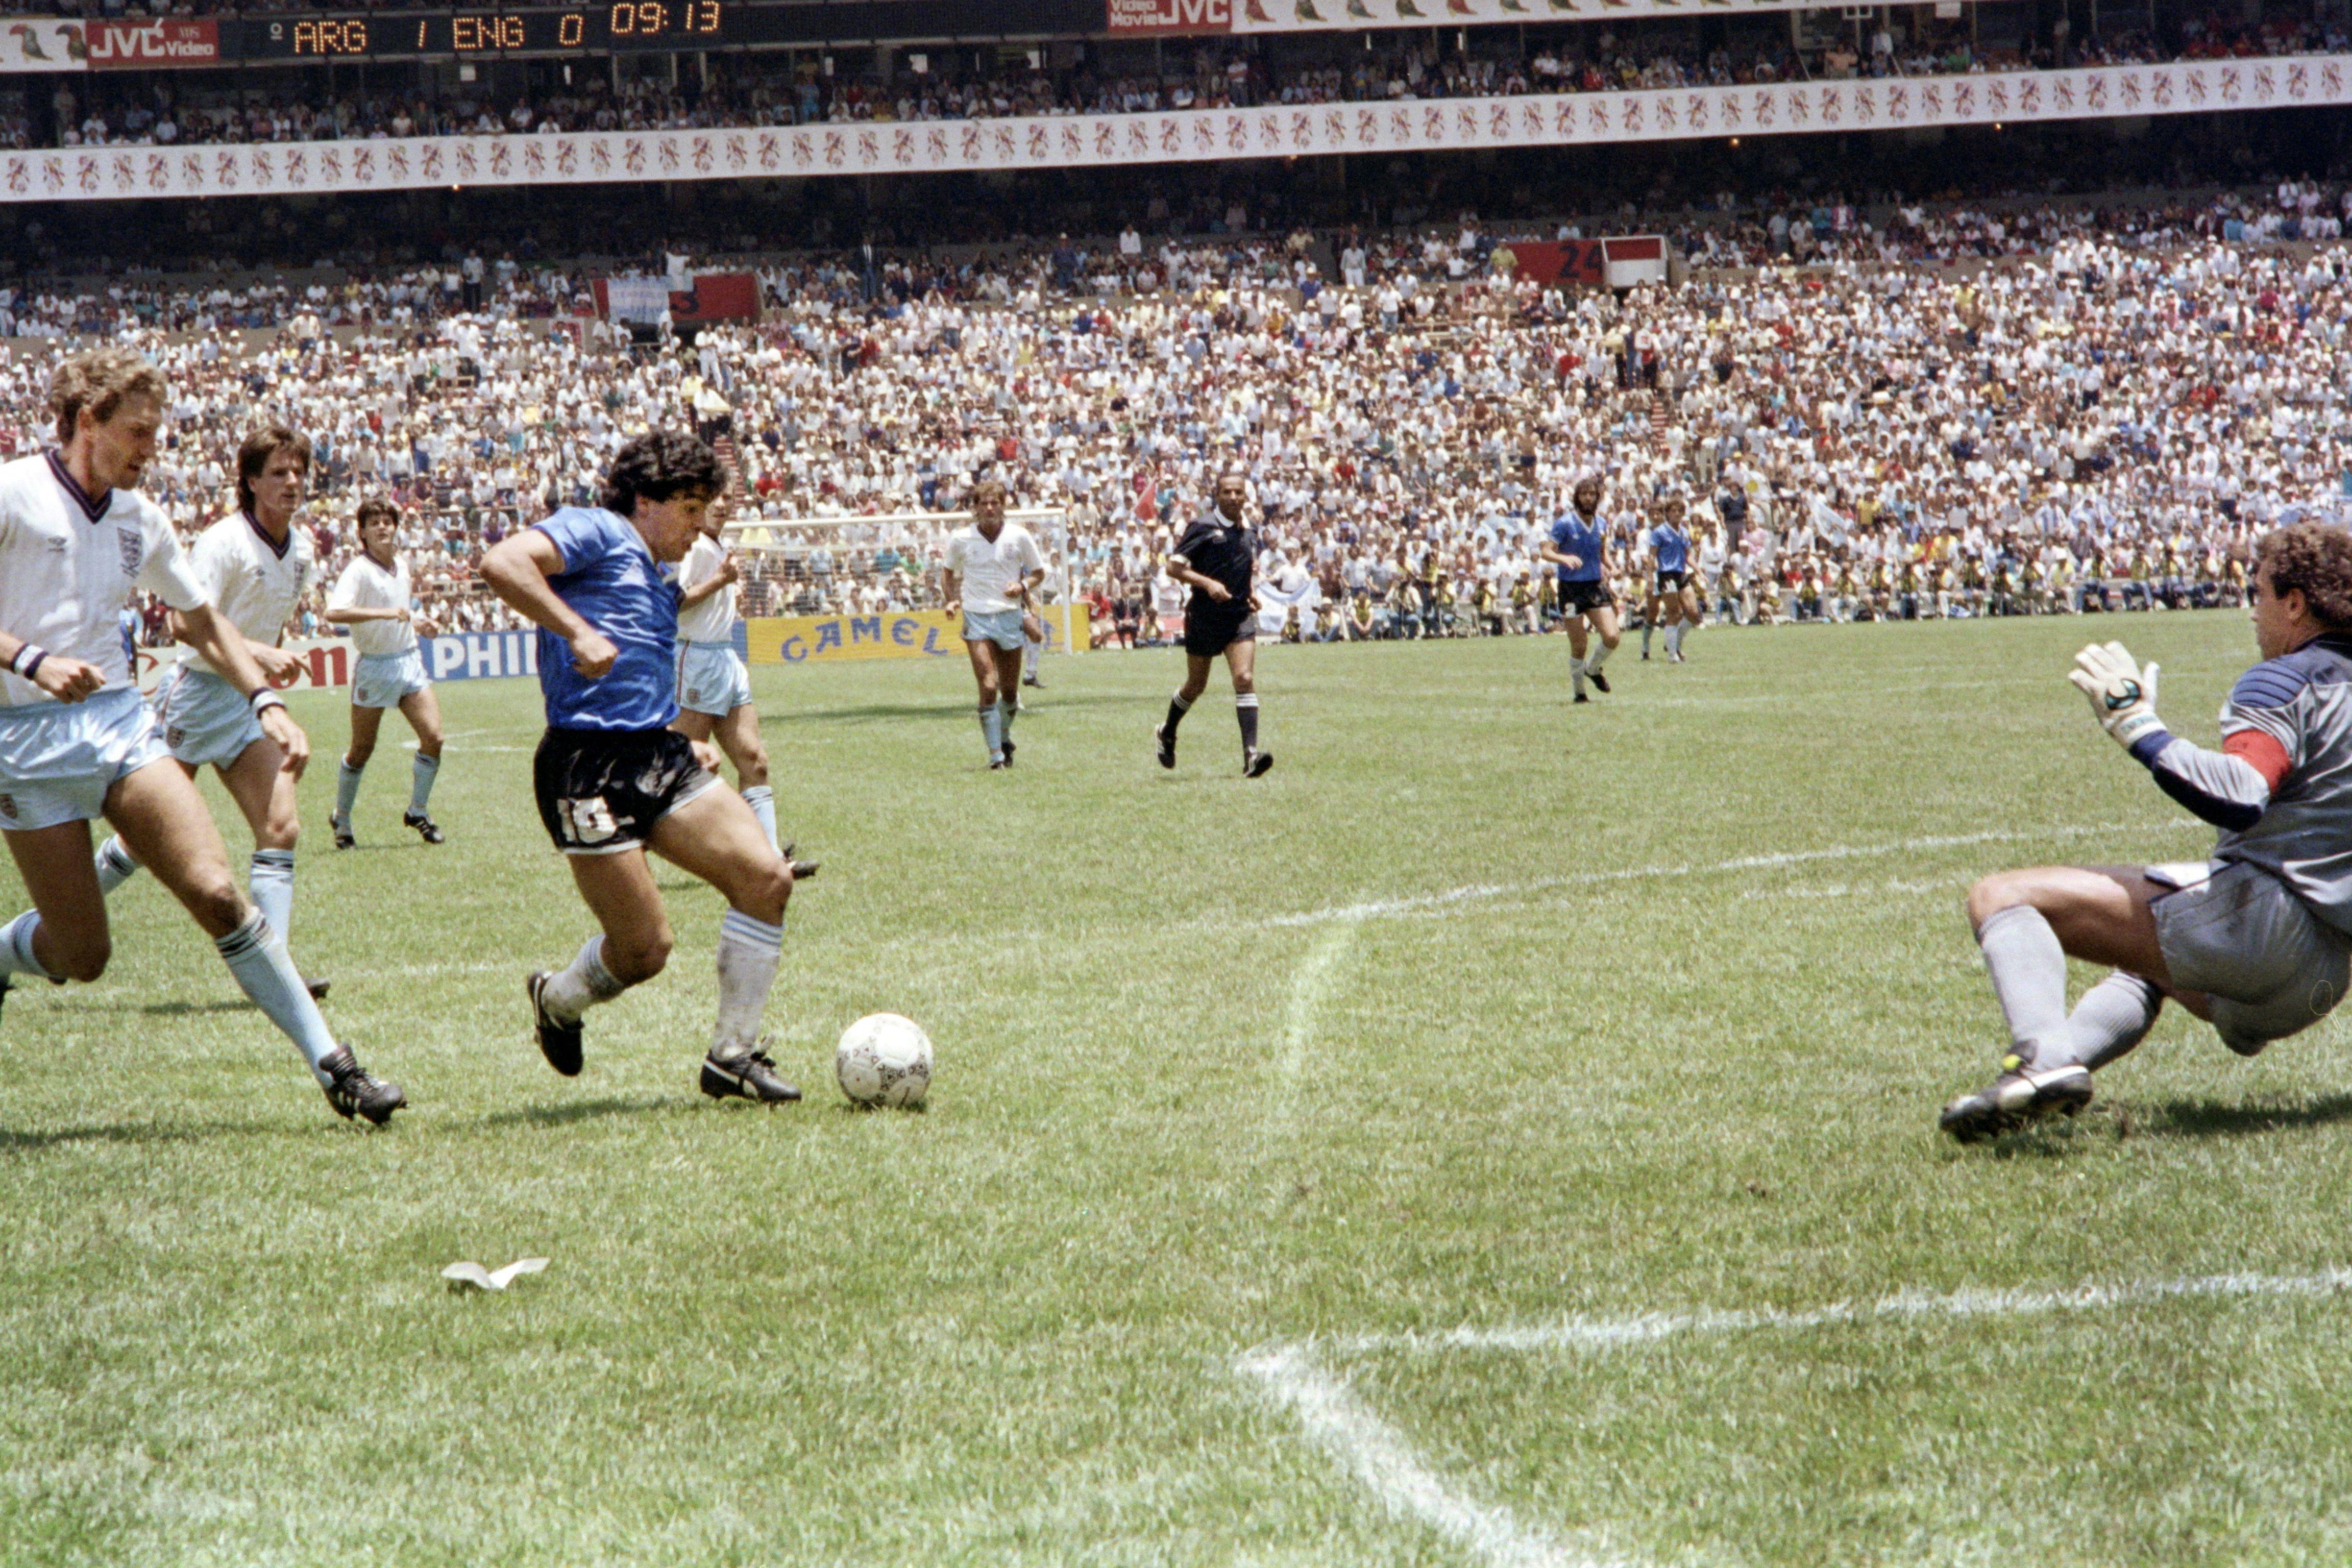 Maradona runs past English defender Terry Butcher on his way to dribbling goalkeeper Peter Shilton, already on the ground, and scoring 